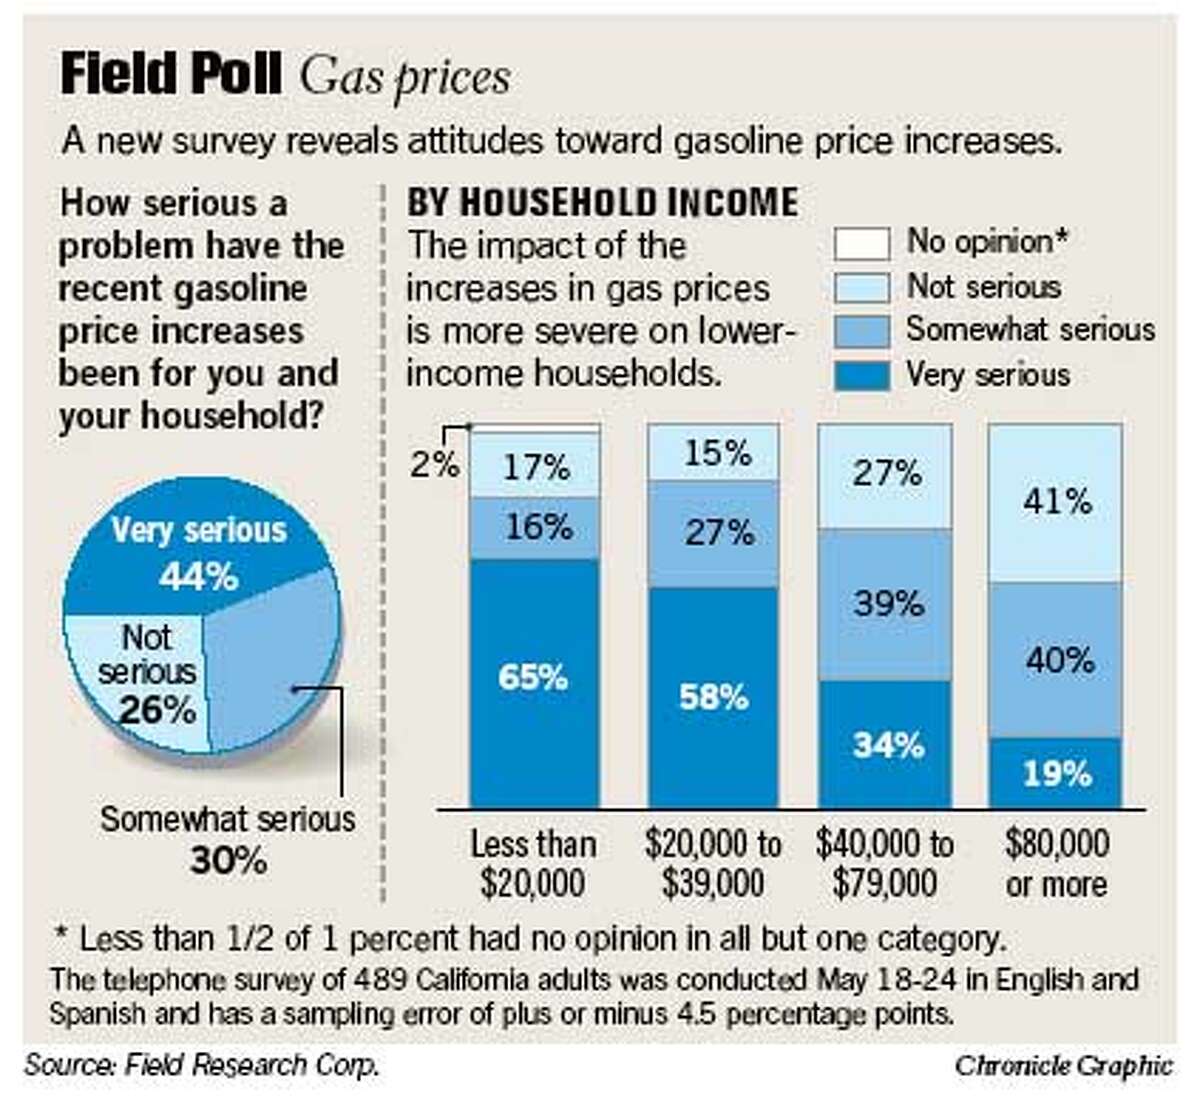 Field Poll / Gas Prices. Chronicle Graphic